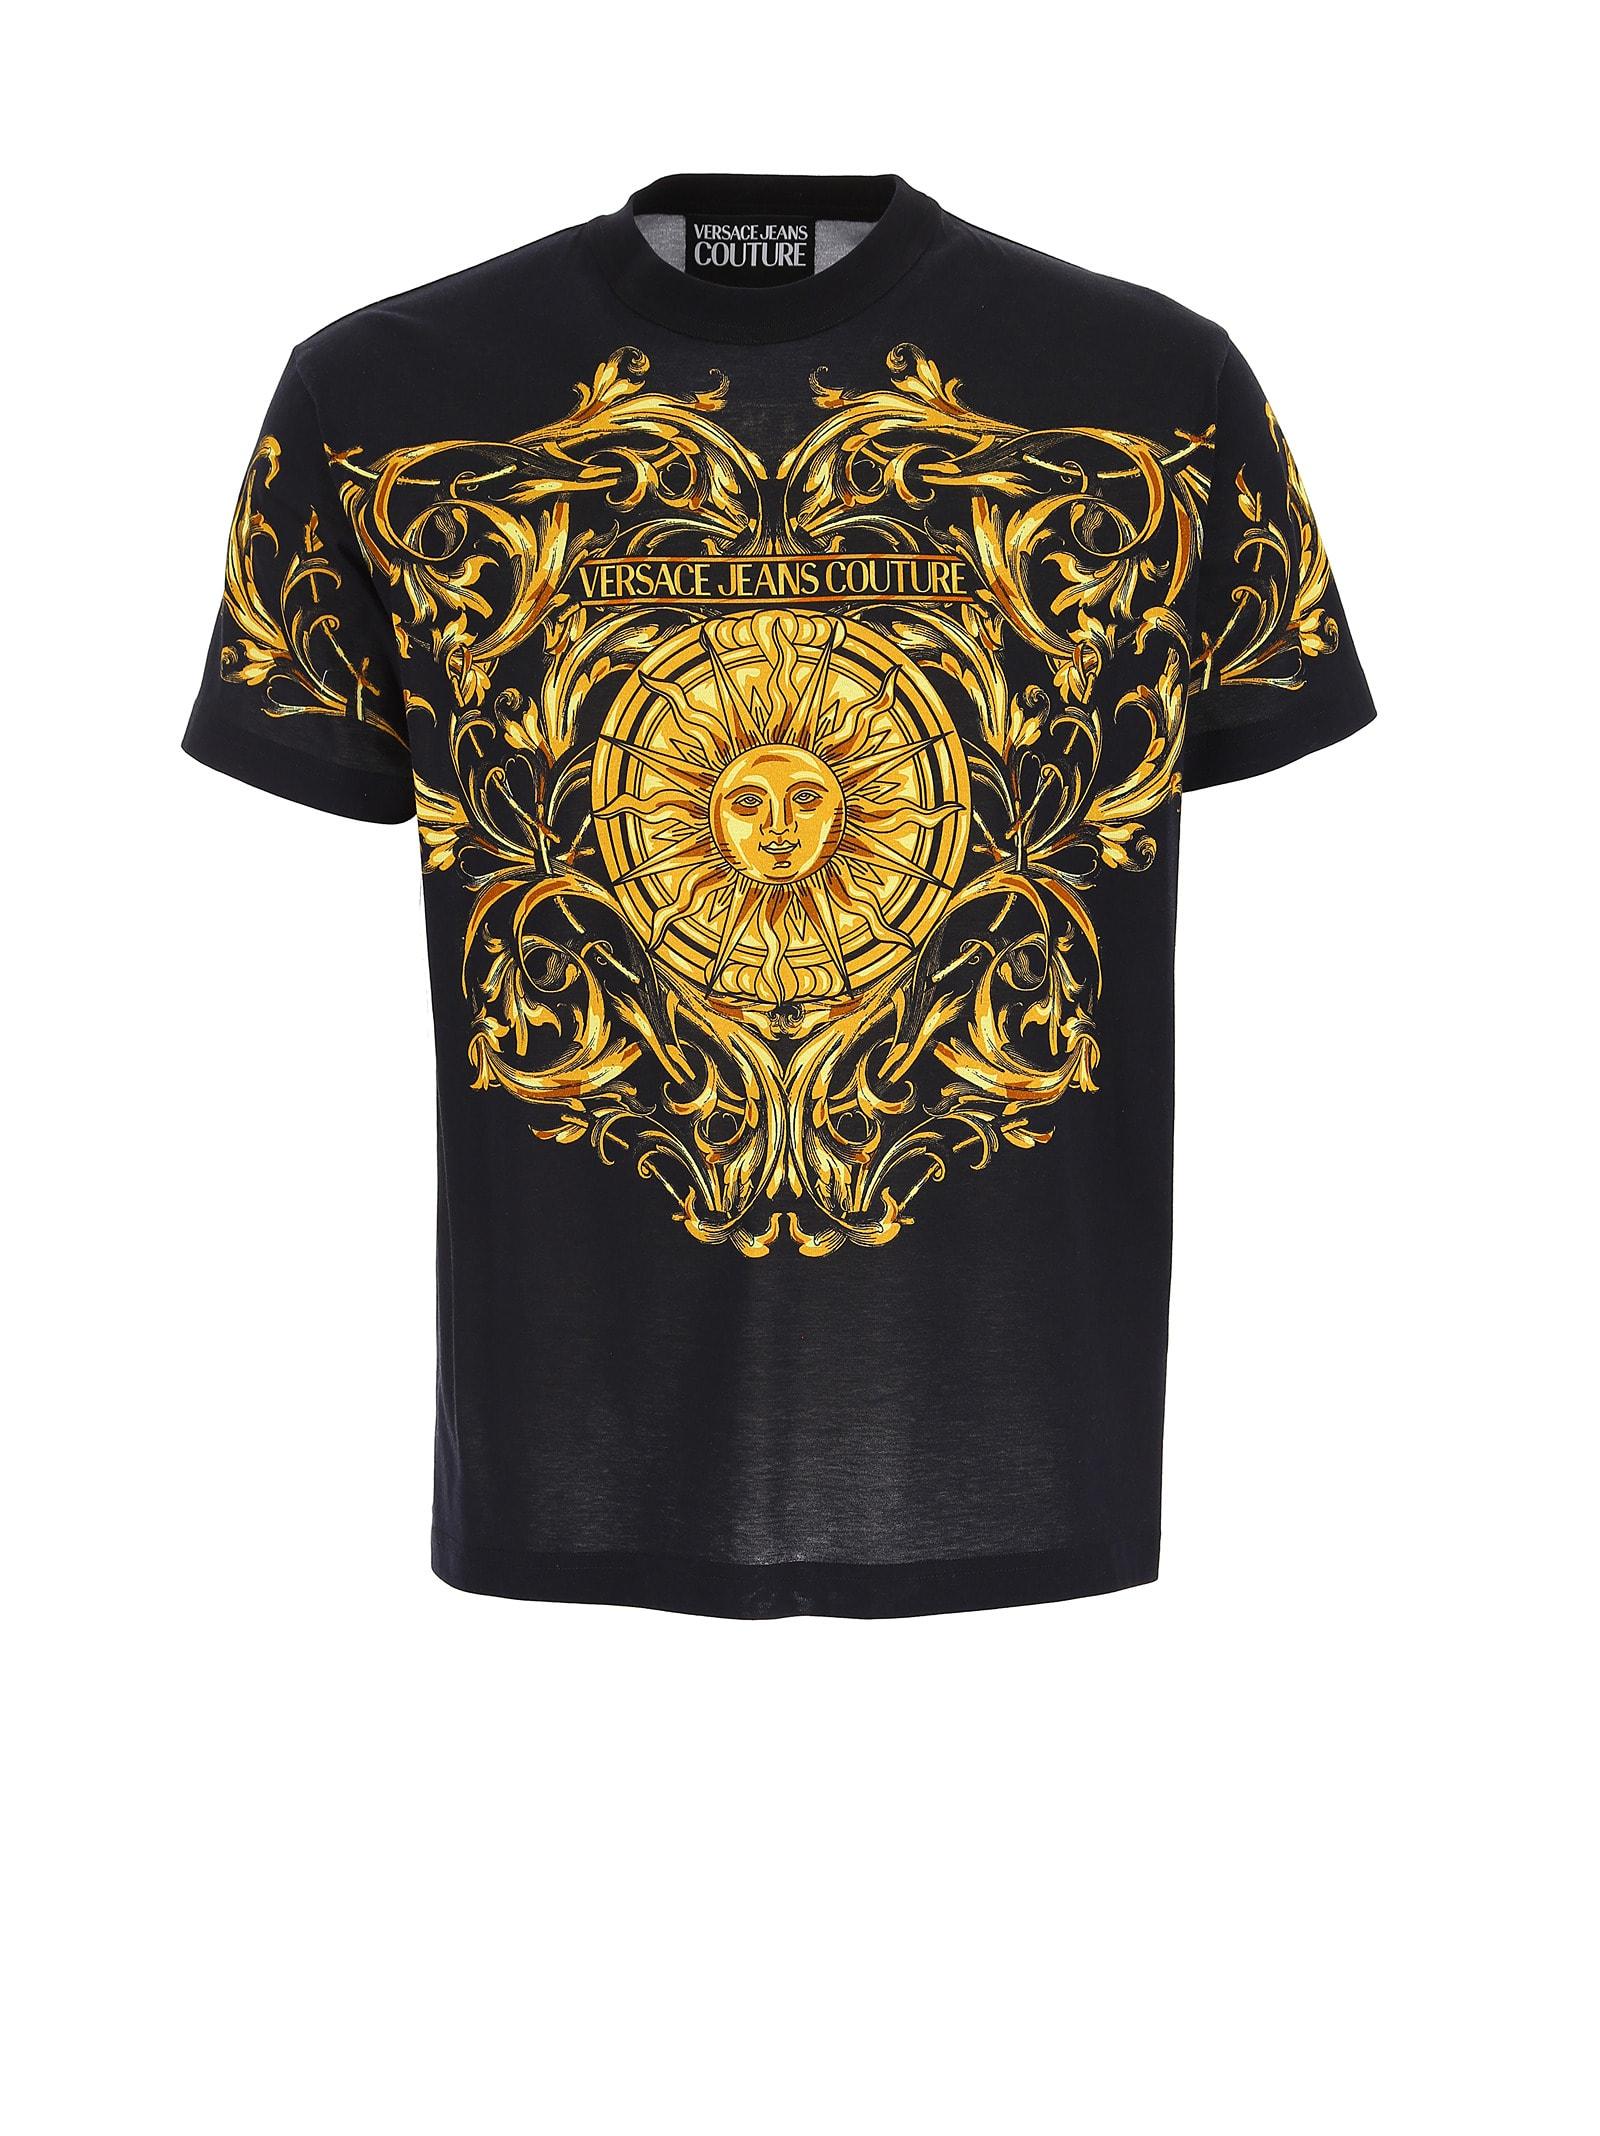 Versace Jeans Couture T-shirt 72up601 Reg Panel Print Baroque Sun Jer. Cot.  Panel Print Sun Baroque in Black for Men | Lyst